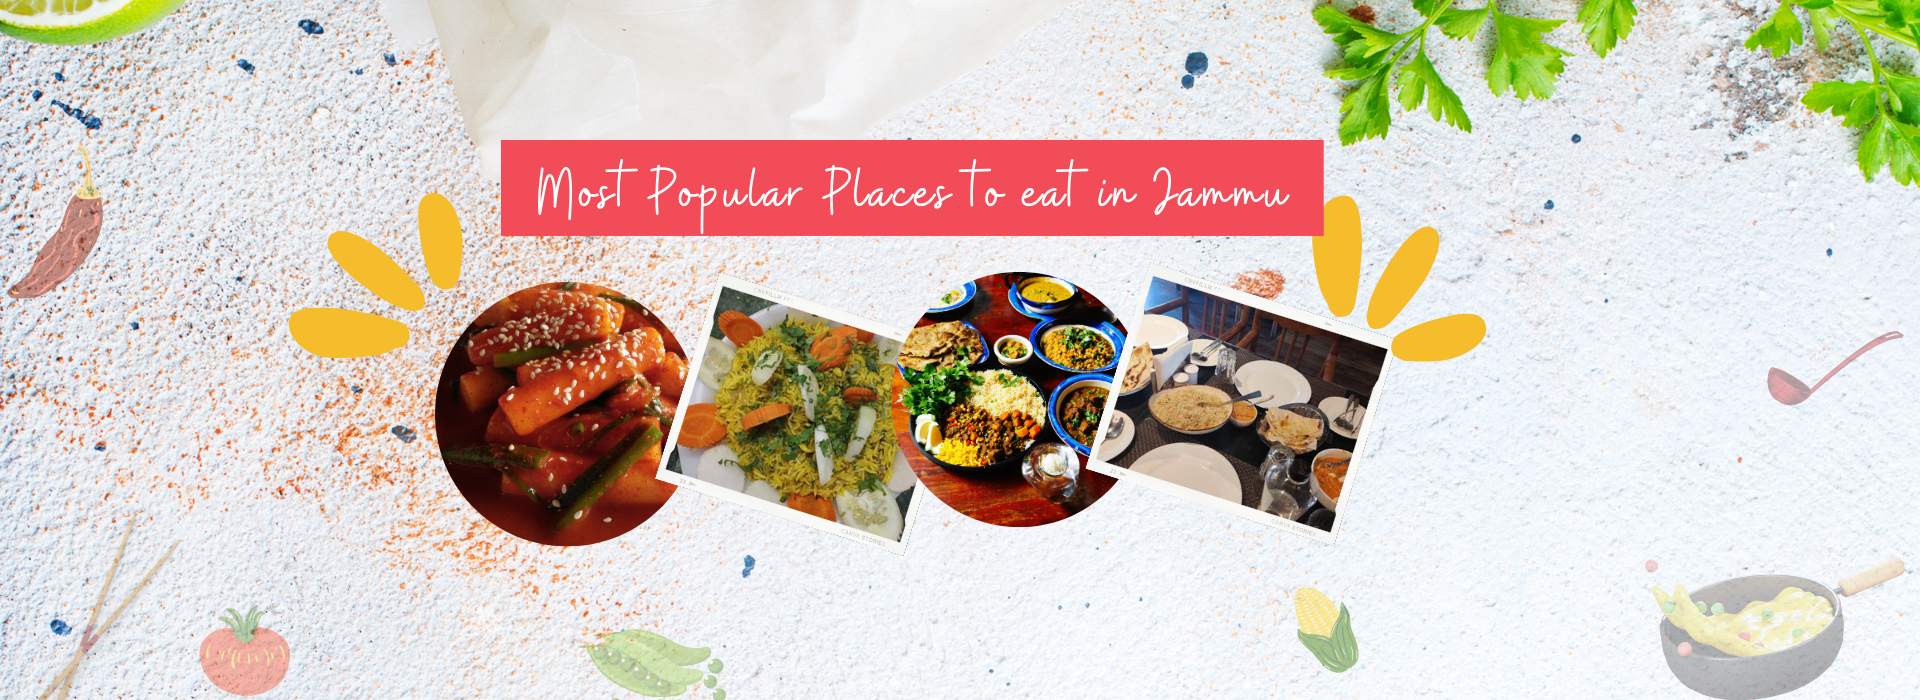 Most Popular Places to Eat in Jammu kashmirhills.com